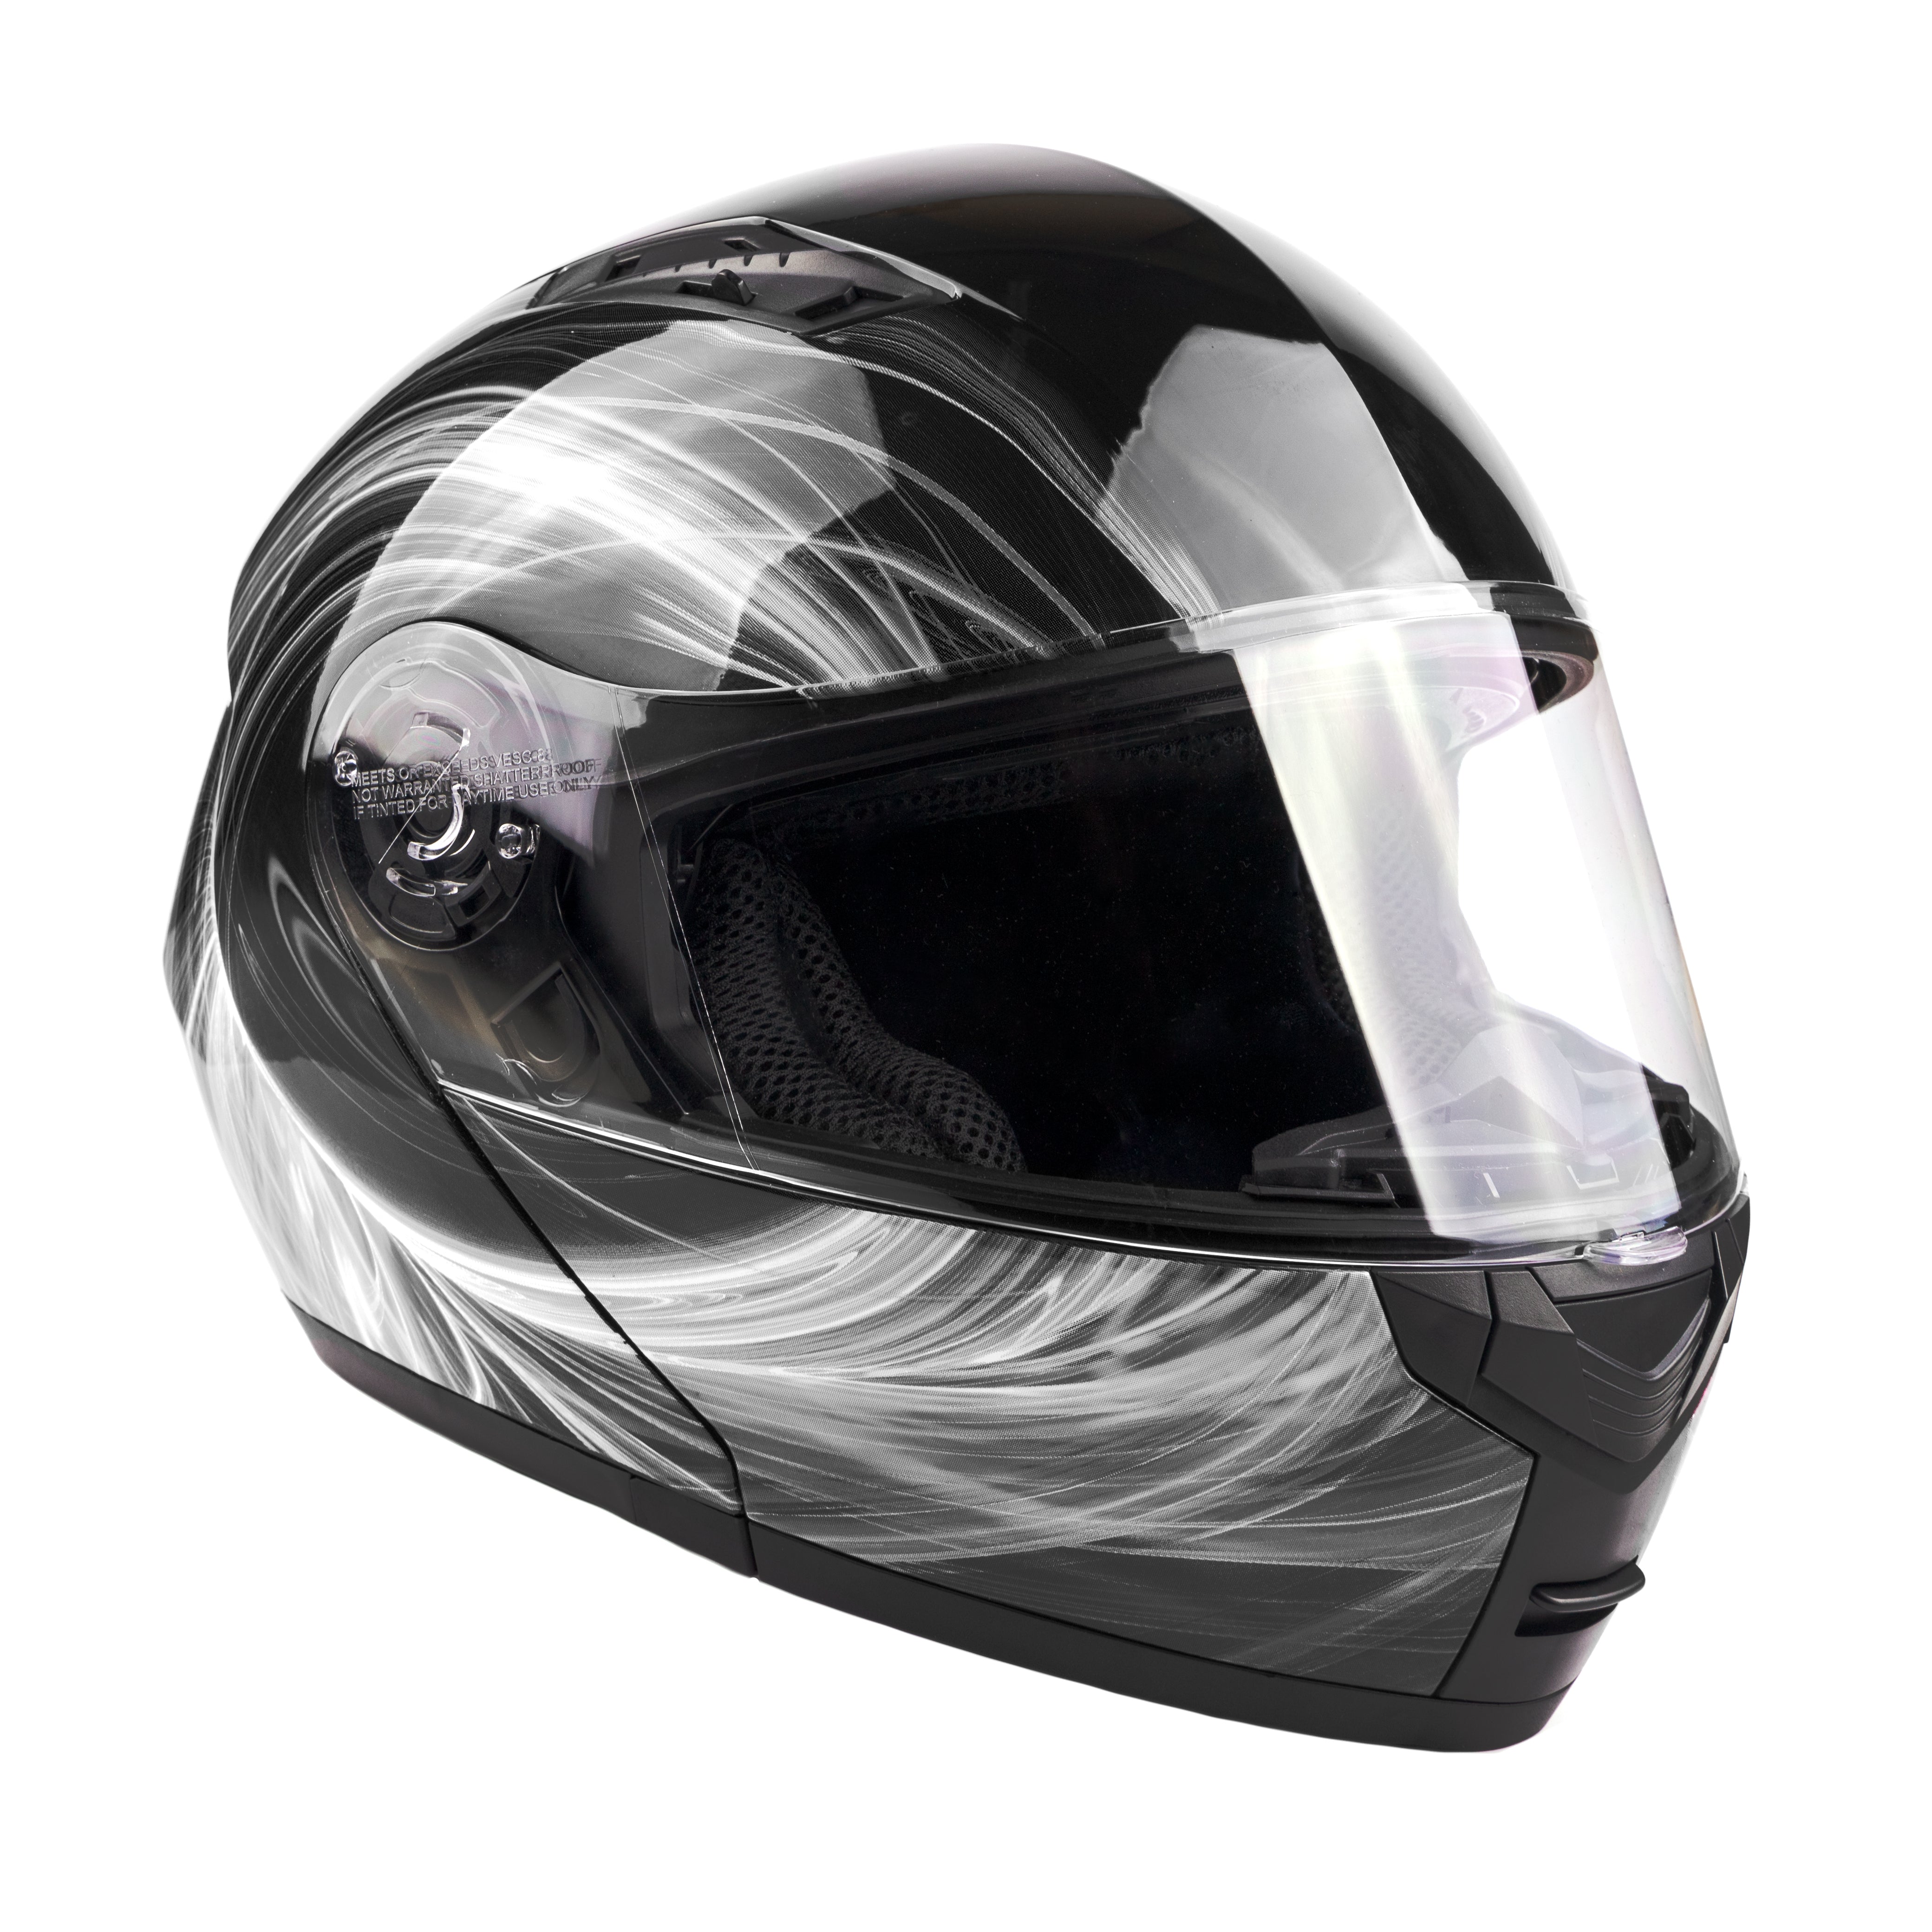 Typhoon Adult Full Face Motorcycle Helmet DOT Certified SAME DAY SHIPPING 